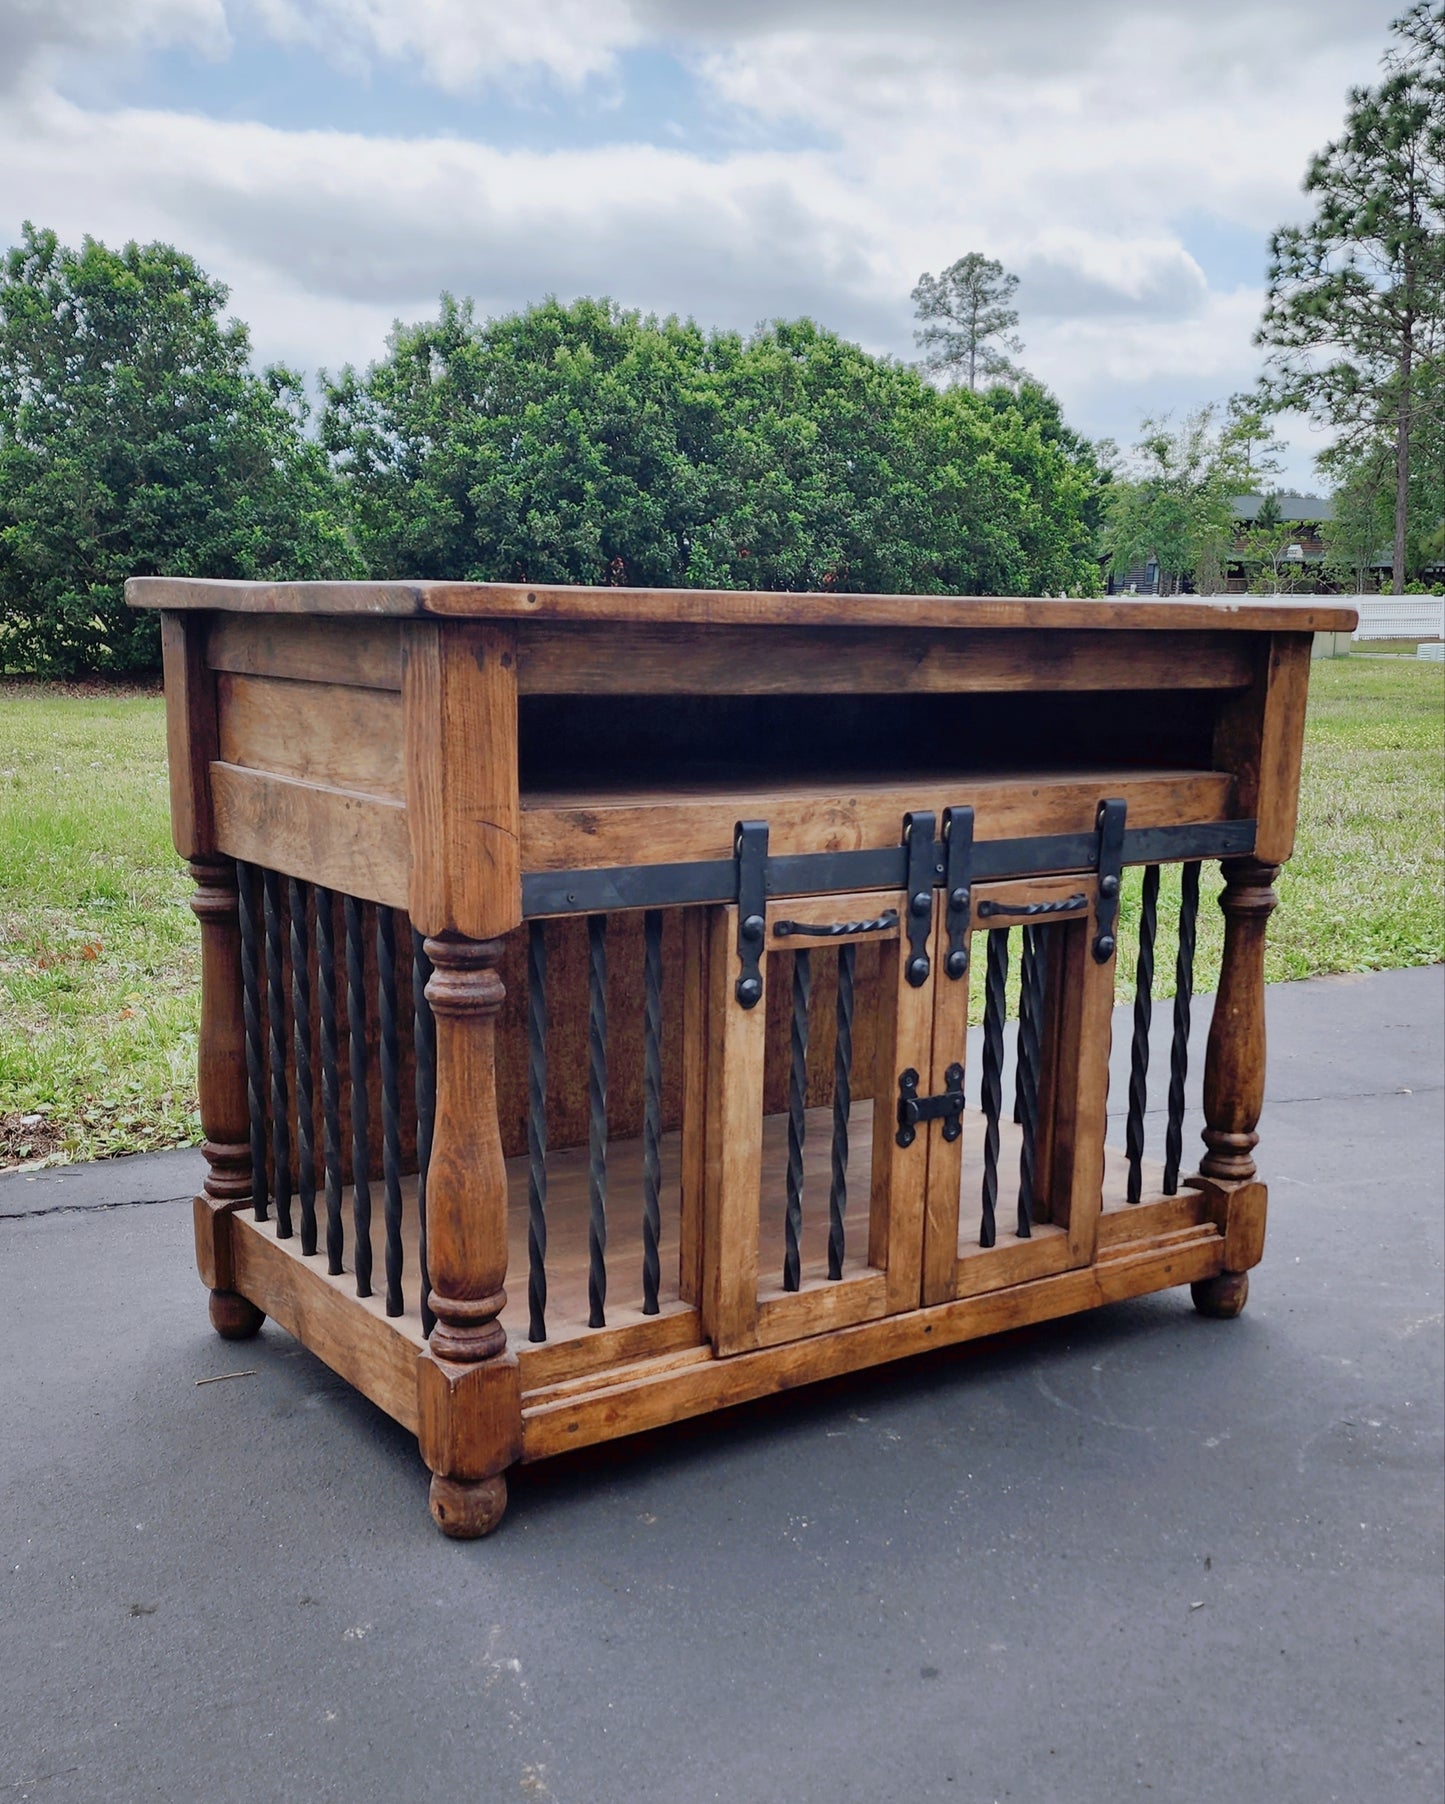 48" Rustic double sliding console dog kennel